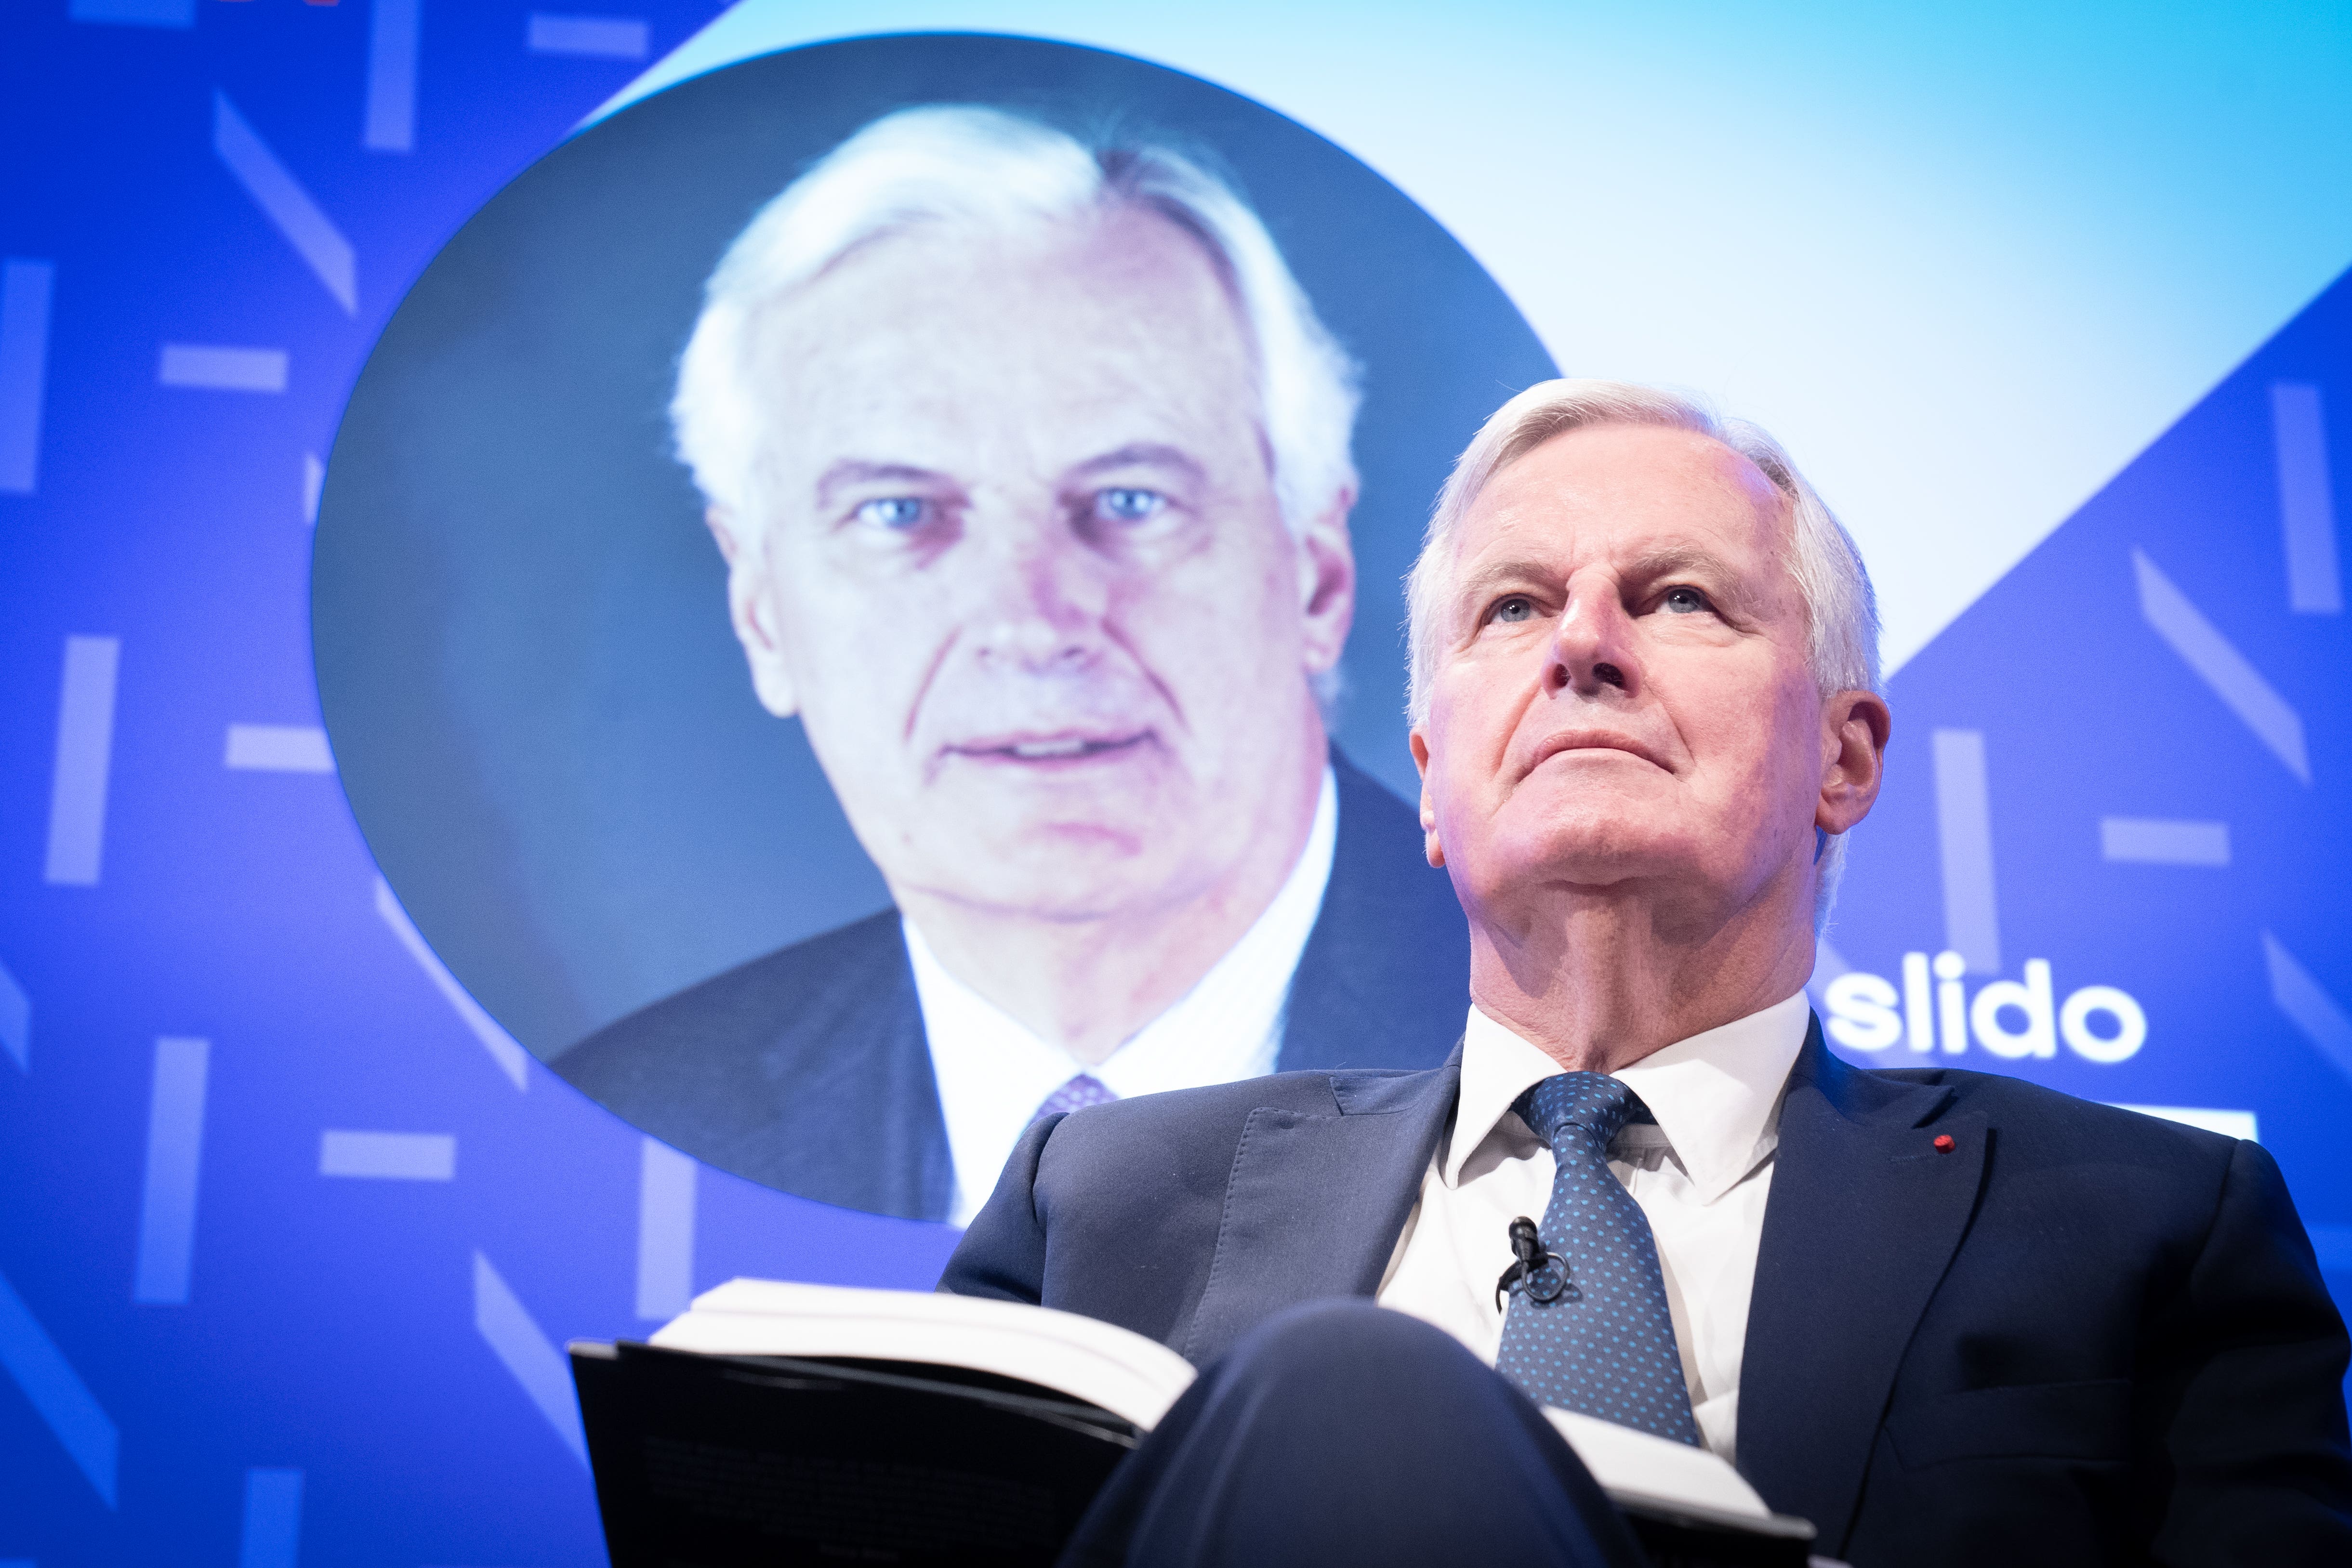 Former EU Brexit negotiator Michel Barnier speaking to a UK In A Changing Europe think tank event (Stefan Rousseau/PA)